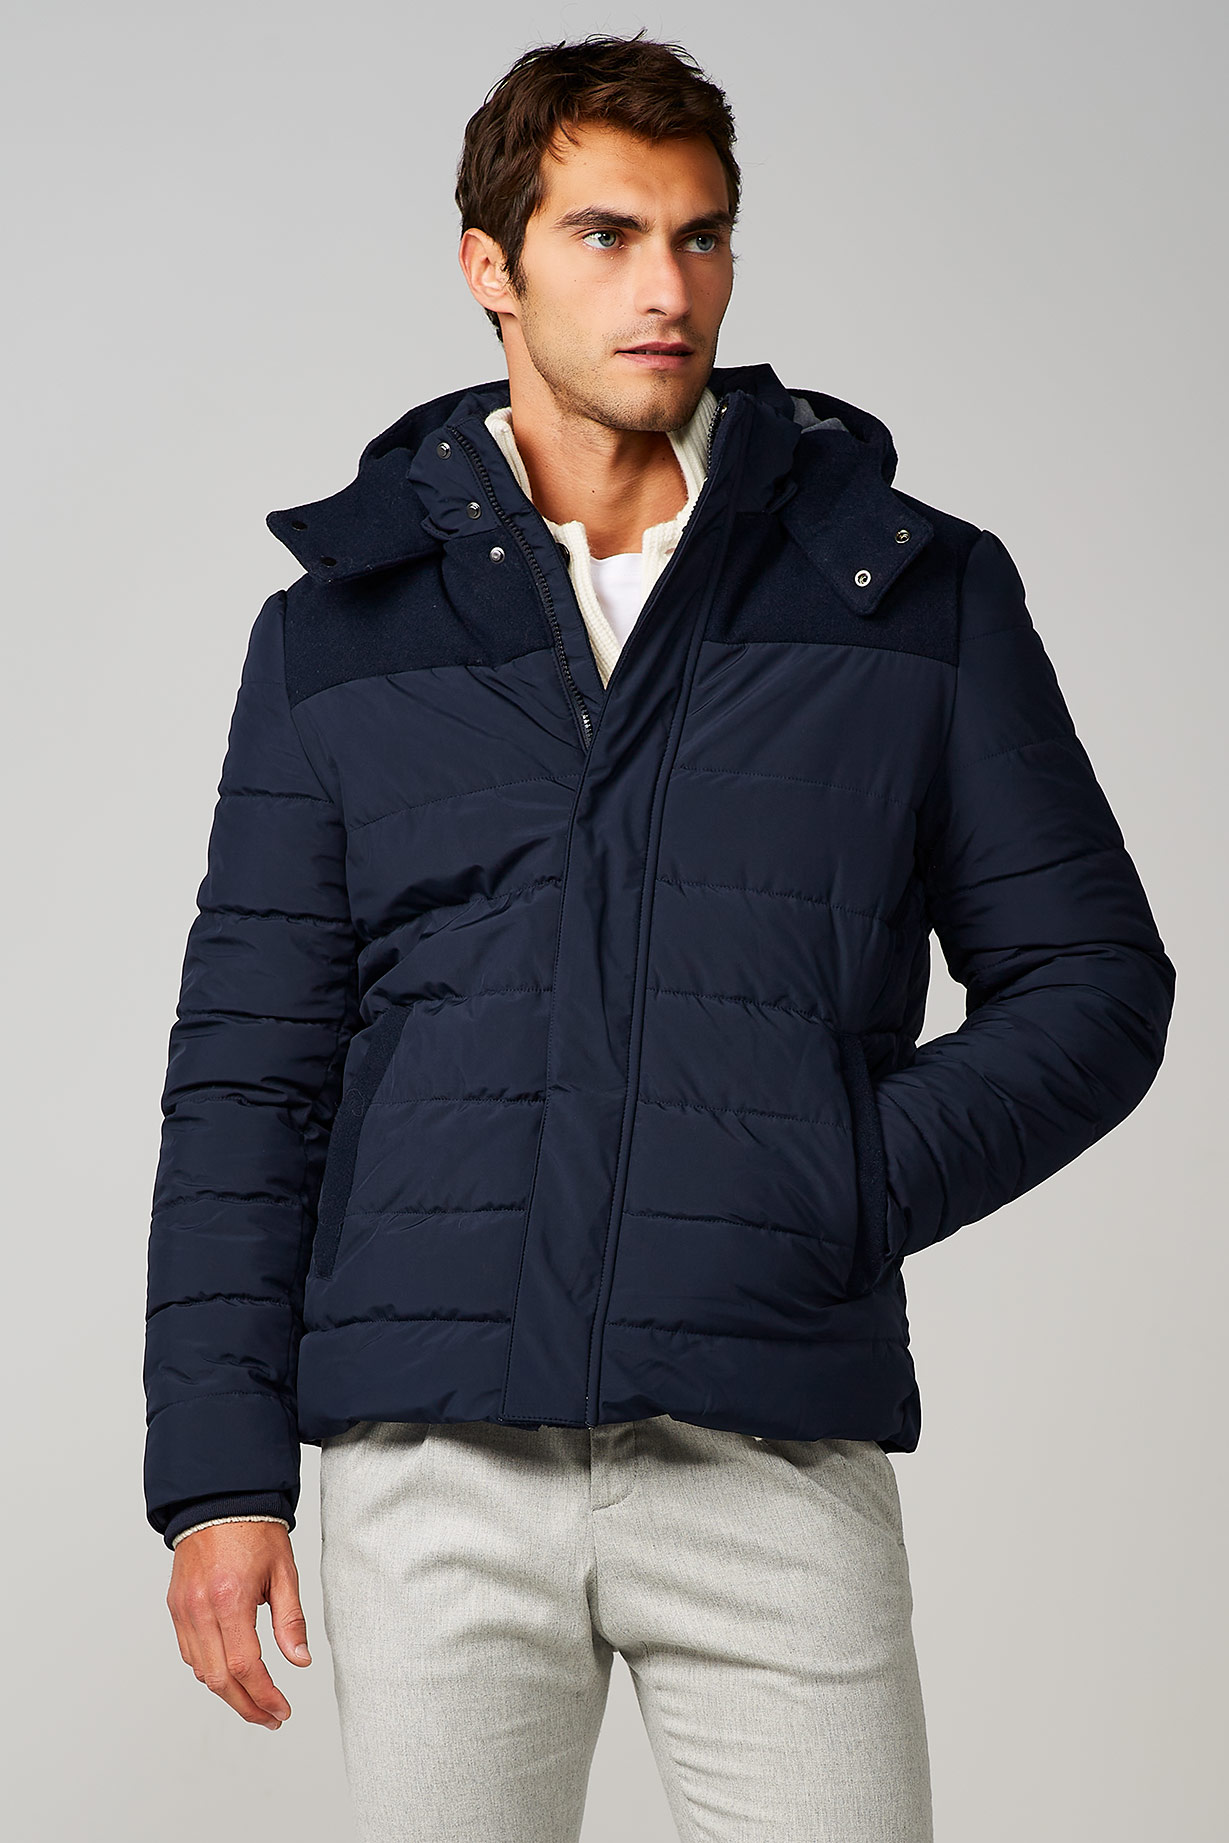 BLUE PADDED JACKET IN NYLON WITH FLANNEL YOKE